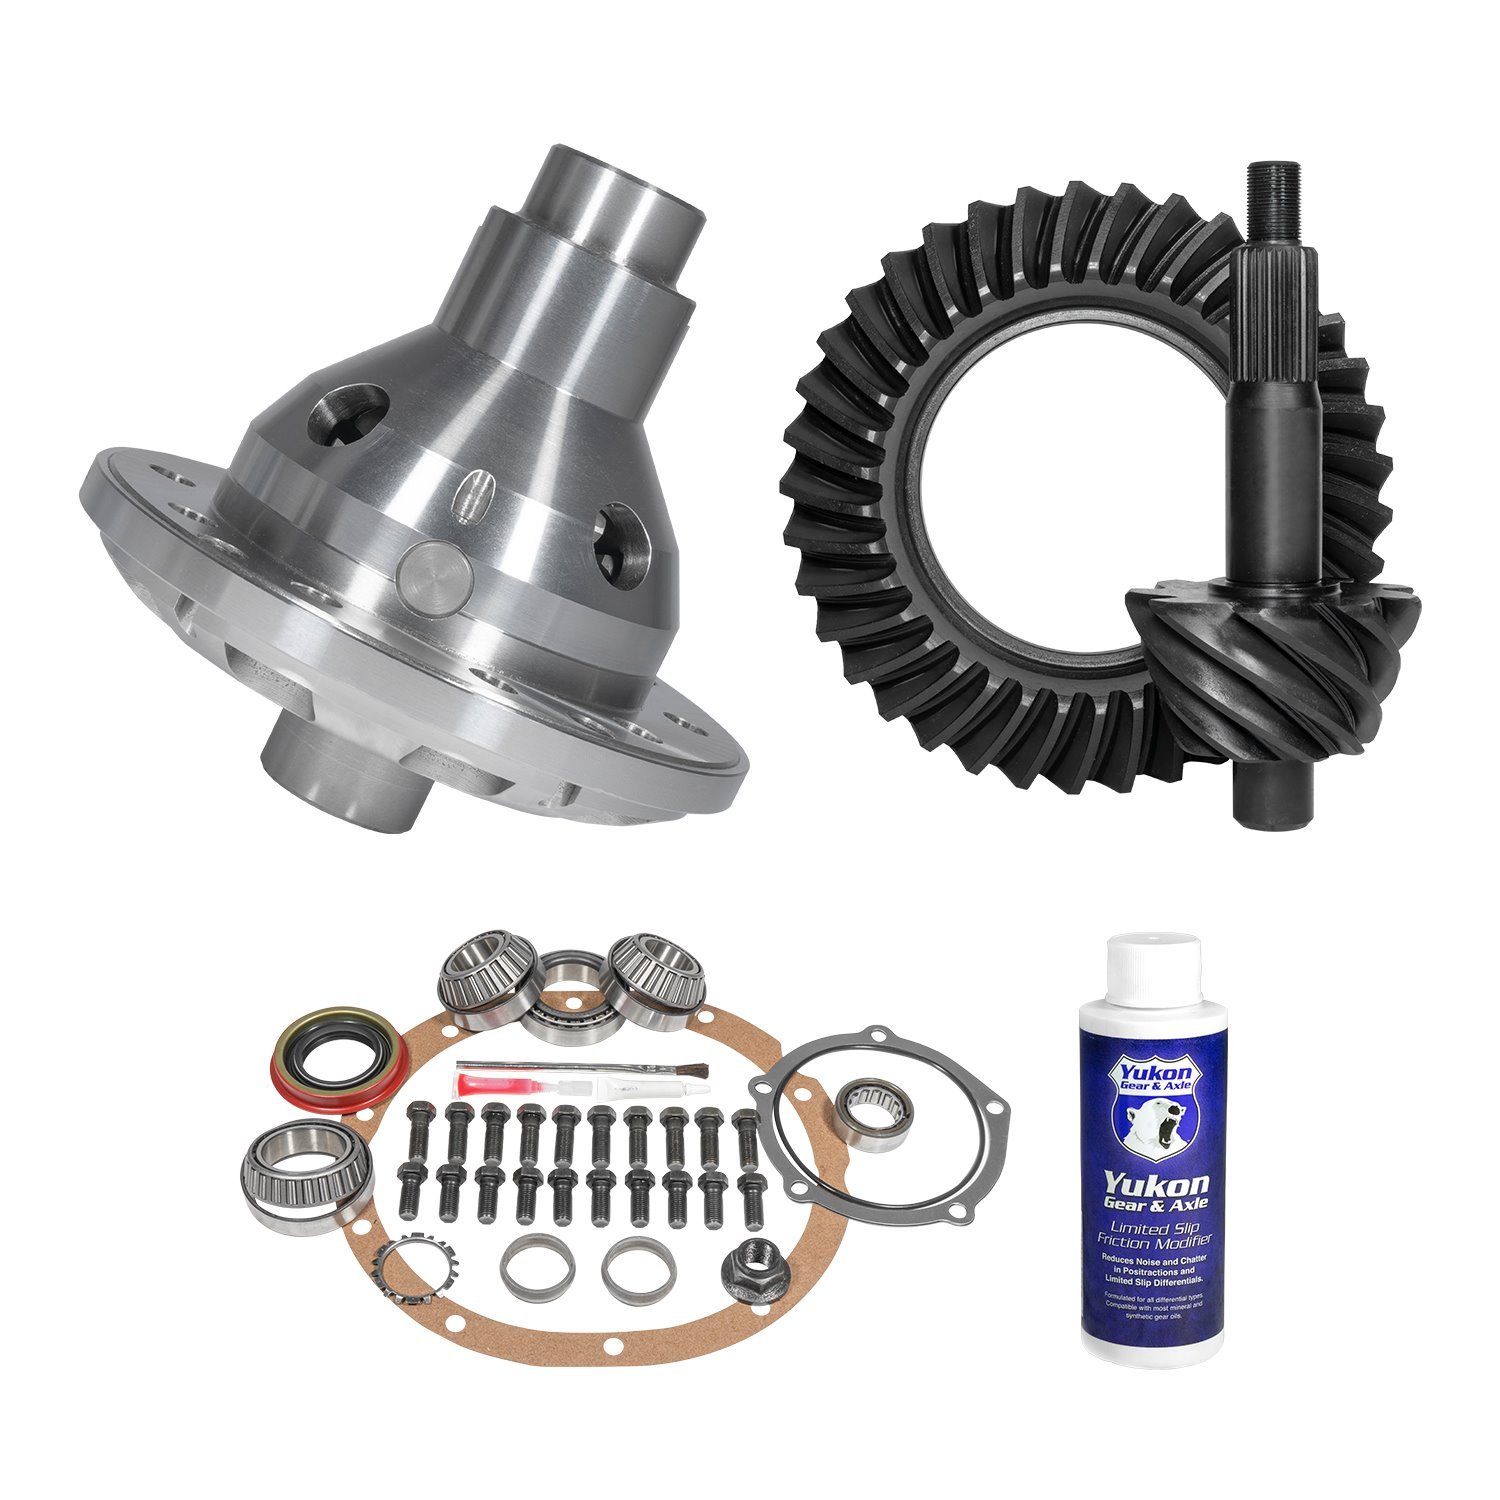 Muscle Car Limited Slip & Re-Gear Kit For Ford 9 in., 28 Spline, 3.25 Ratio